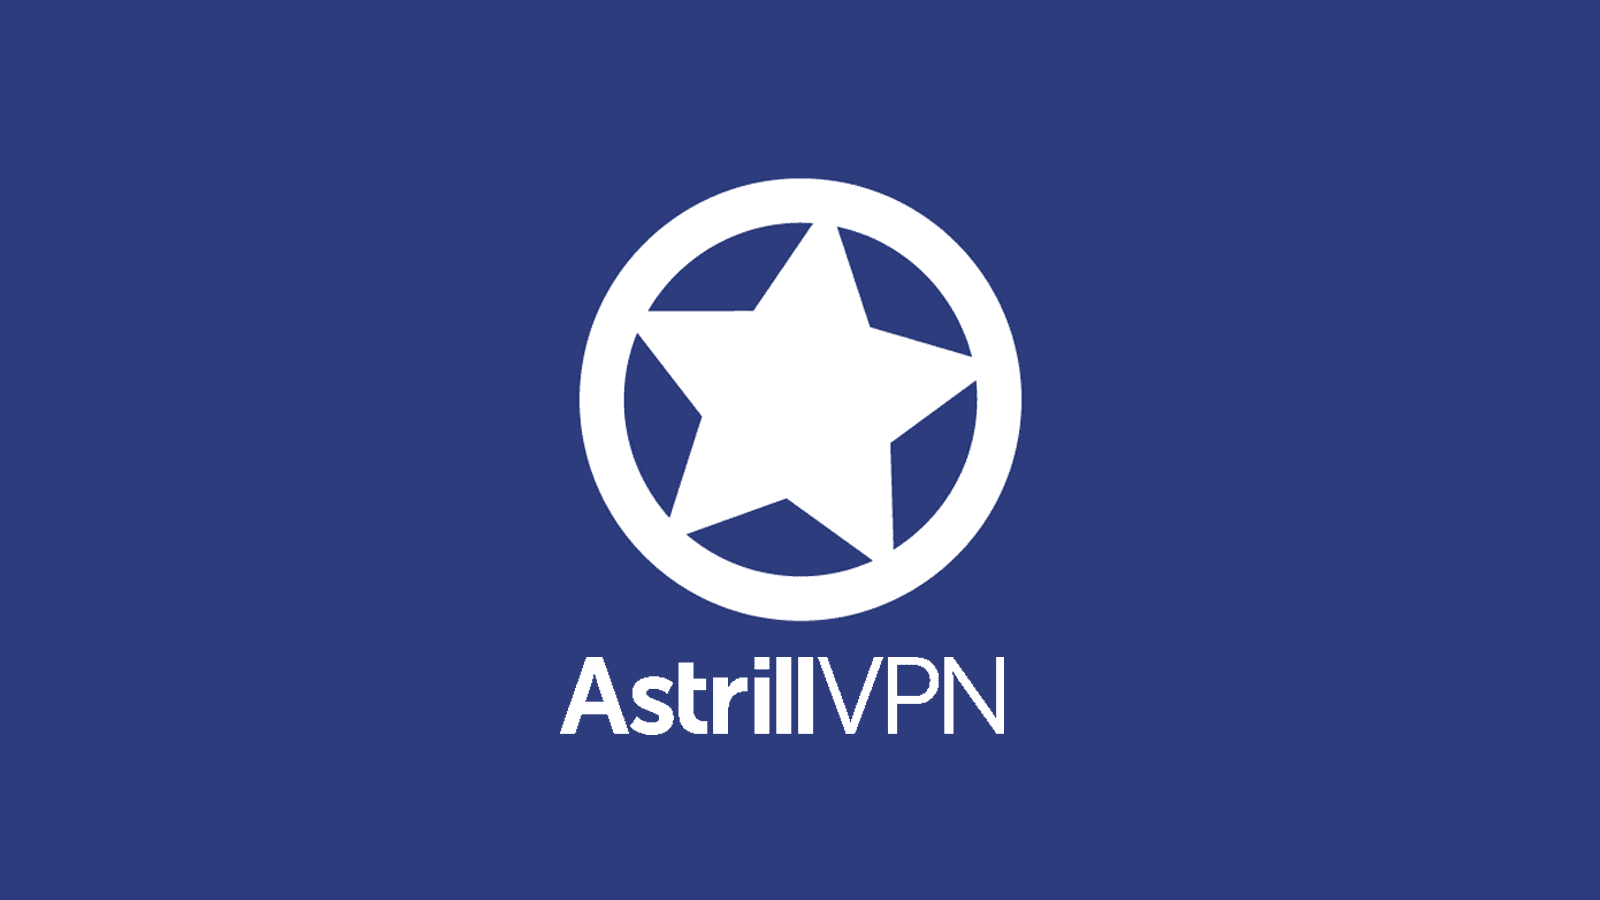 AstrillVPN Is This VPN Its Price Tag? - The VPN